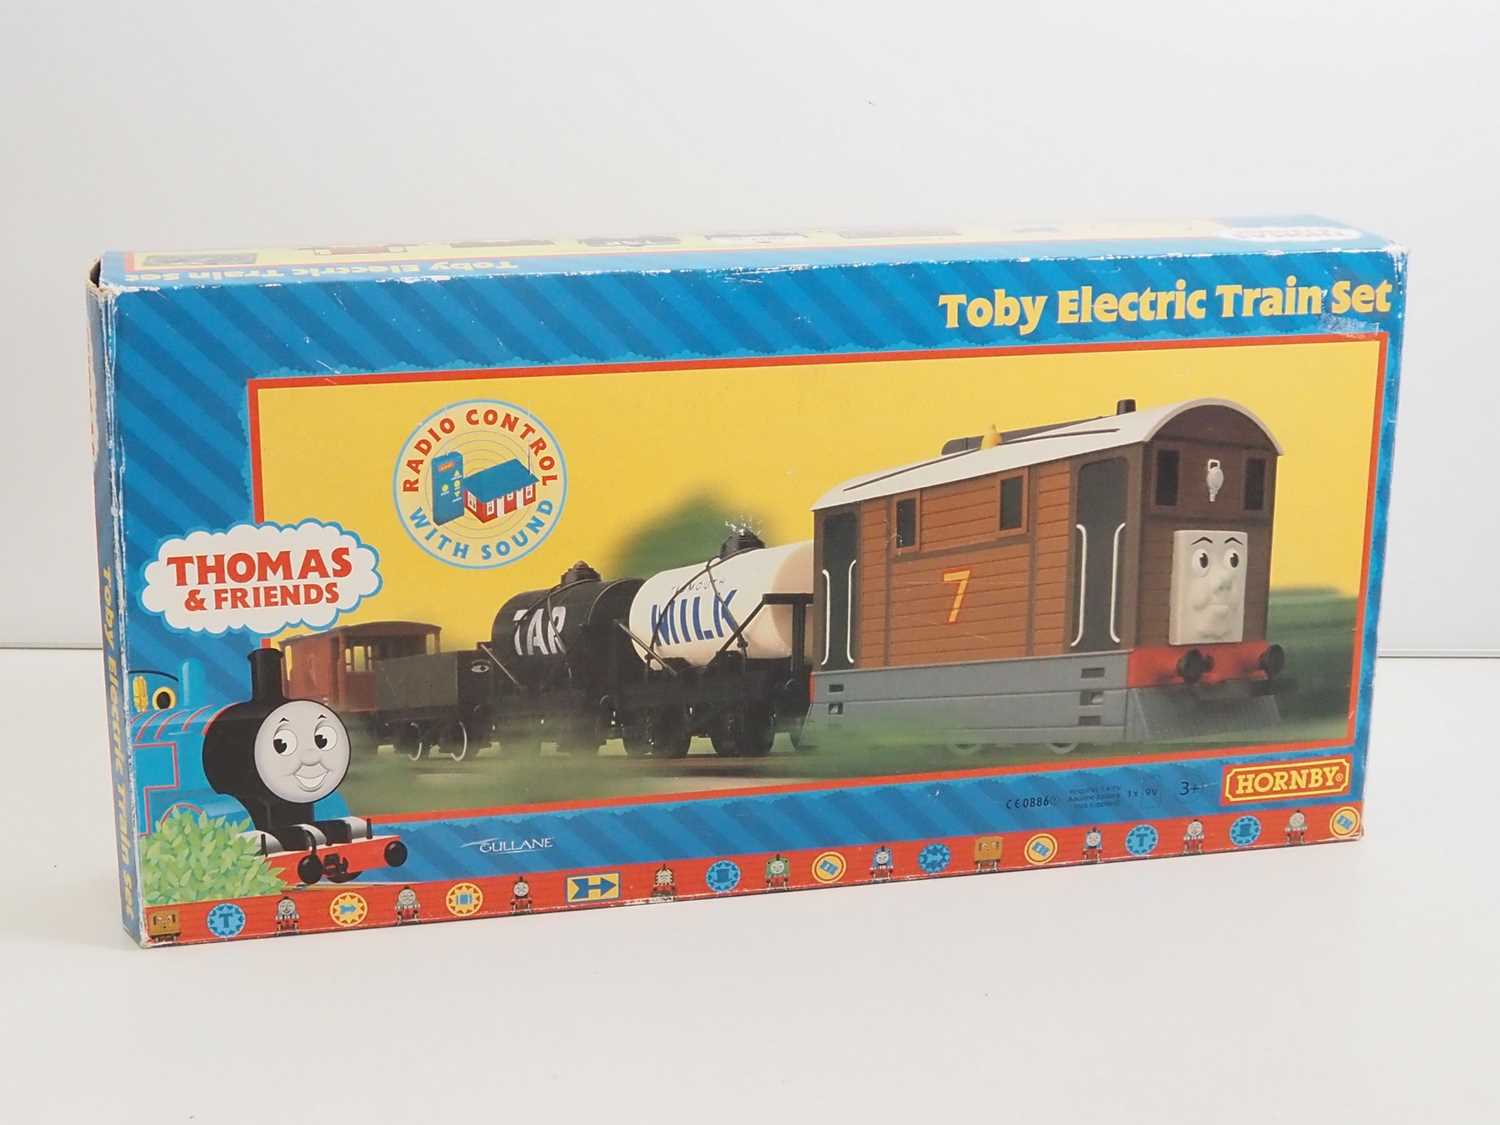 A HORNBY OO gauge 'Thomas and Friends' series 'Toby' train set - comprising Toby the tram engine, - Image 5 of 6